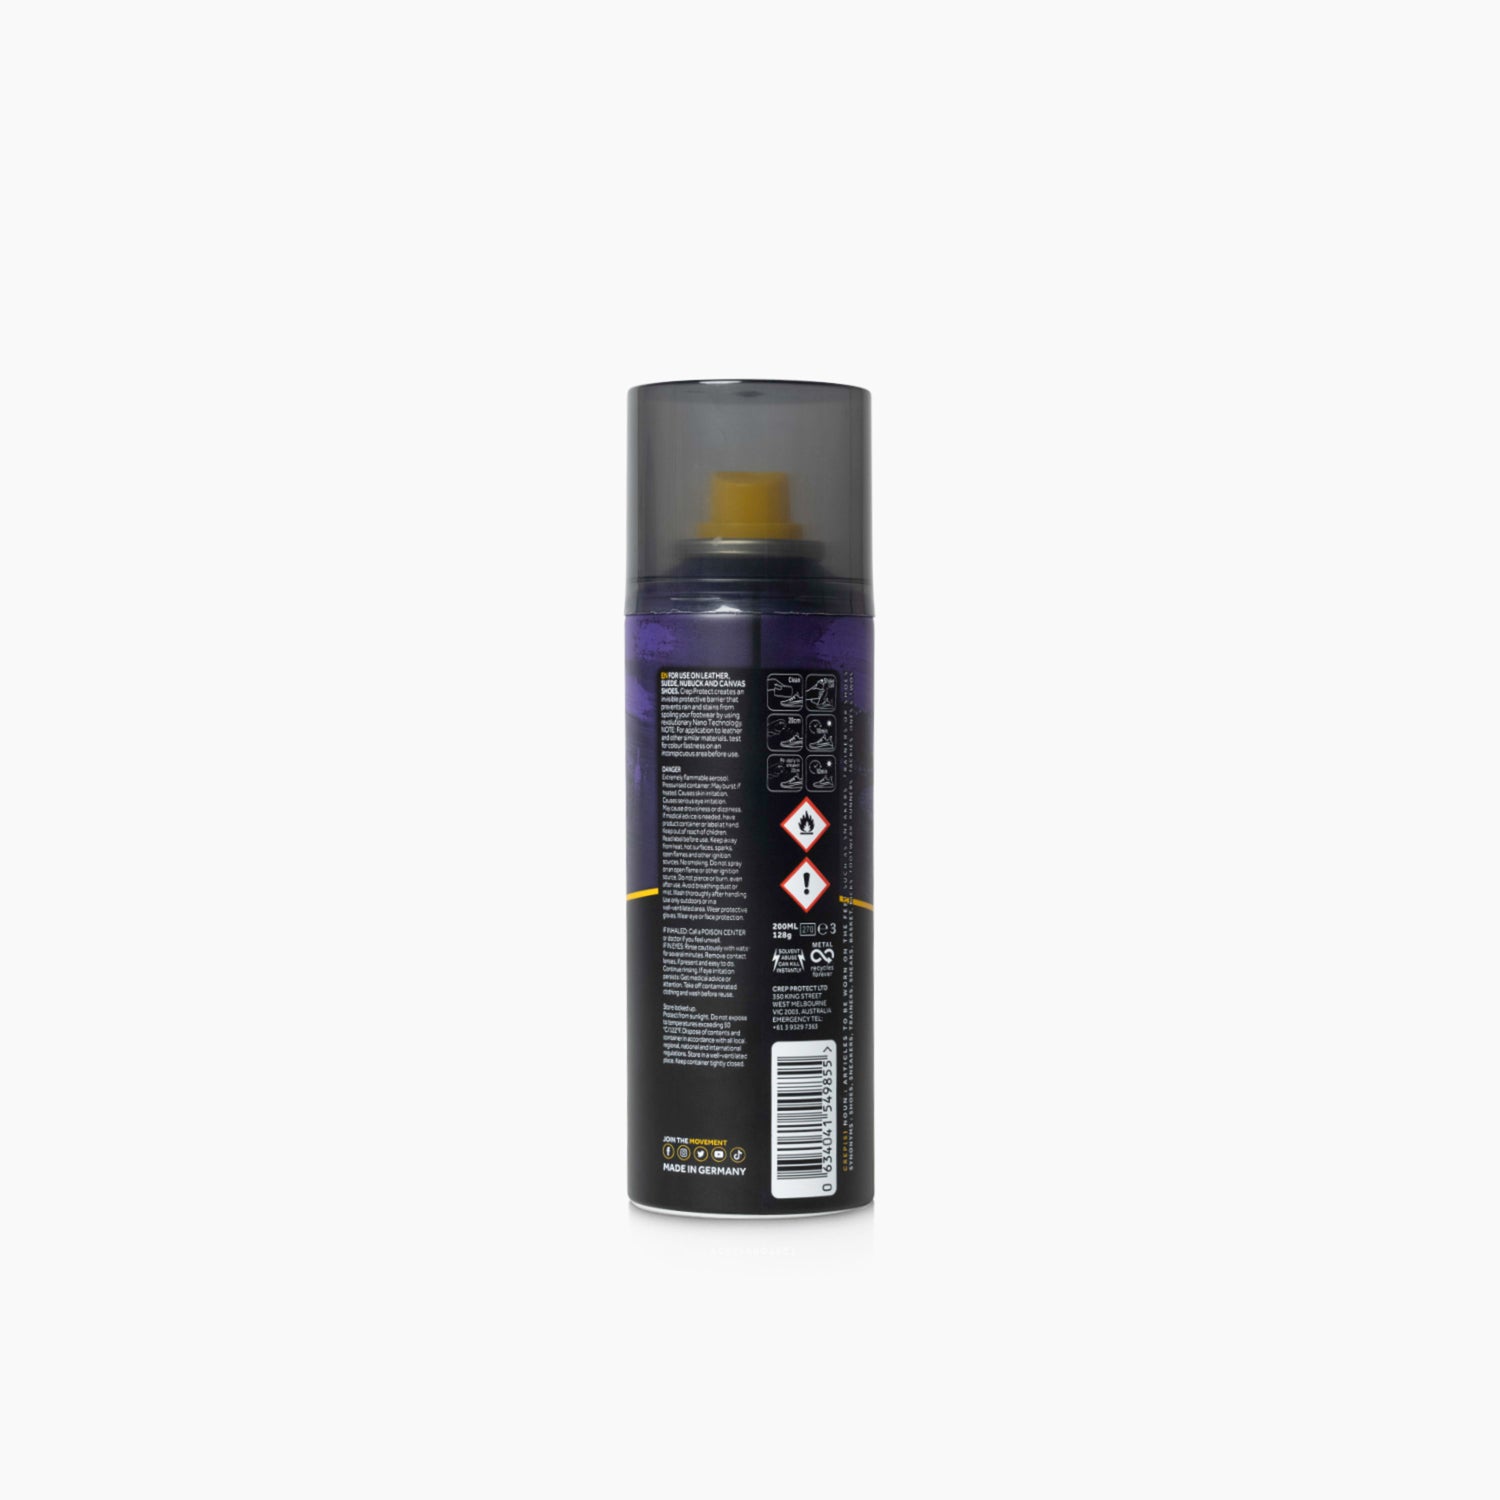 Crep Protect Spray 200ml (2 stores) see prices now »